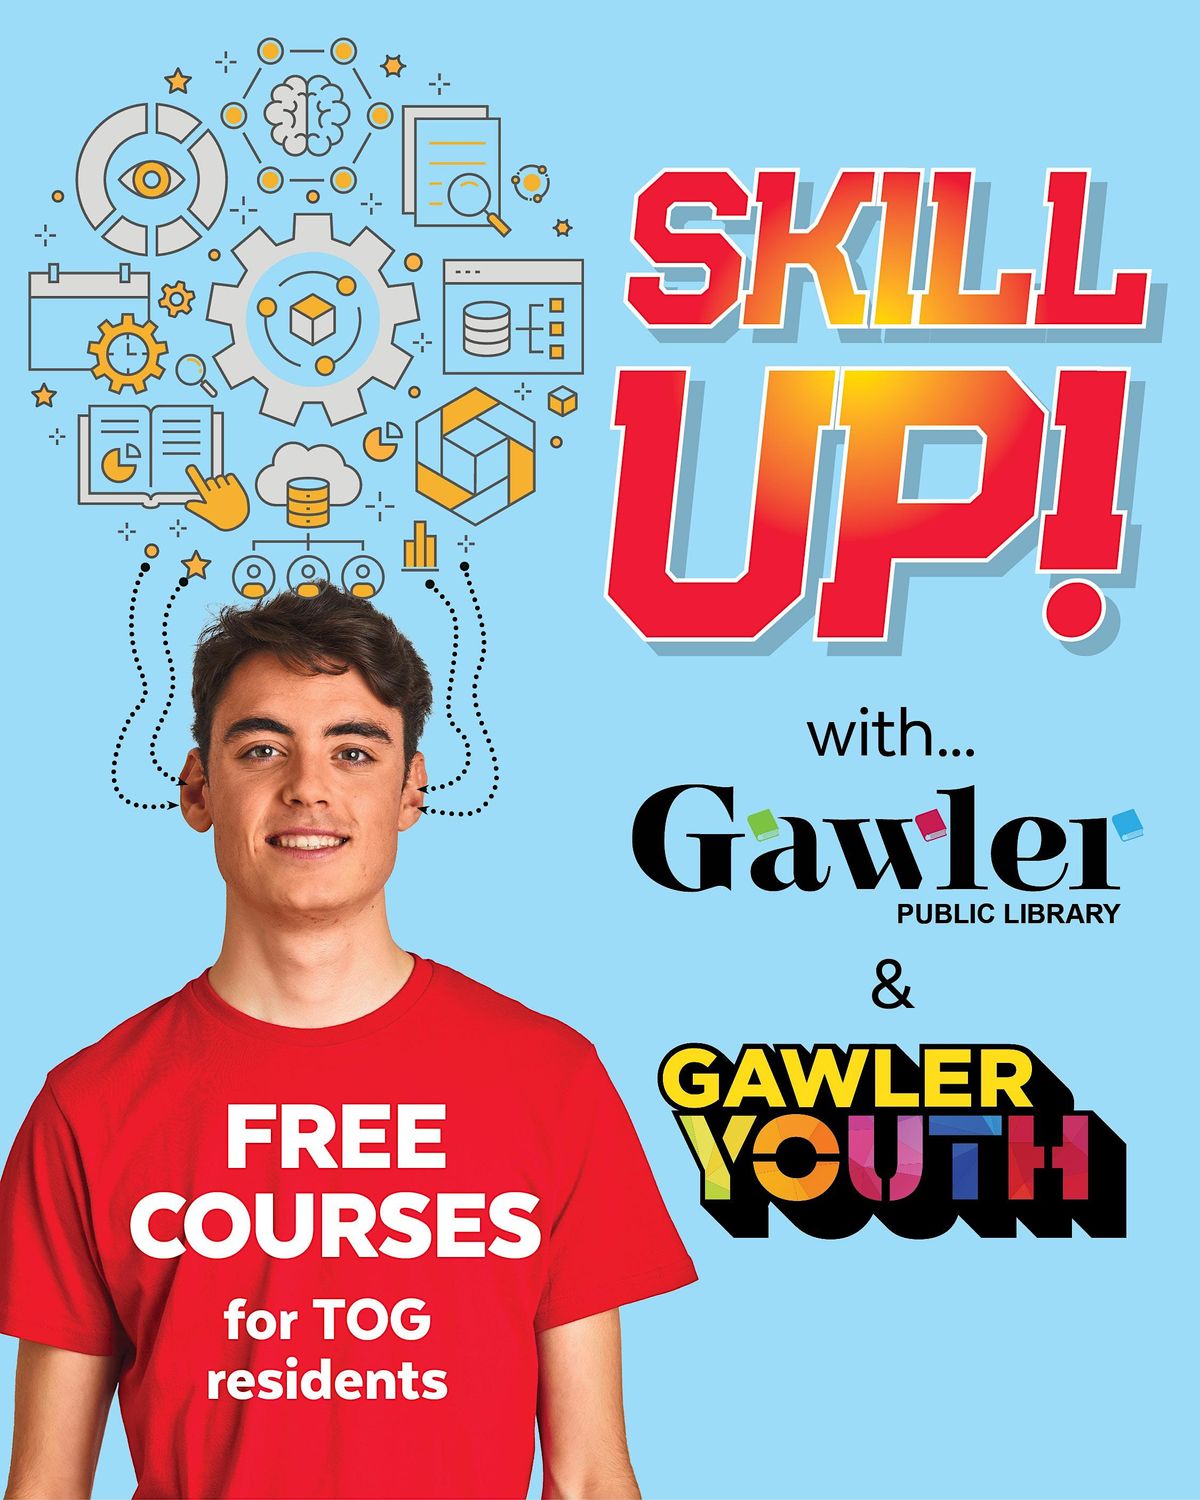 Skill up with Gawler Youth  and Gawler Public Library